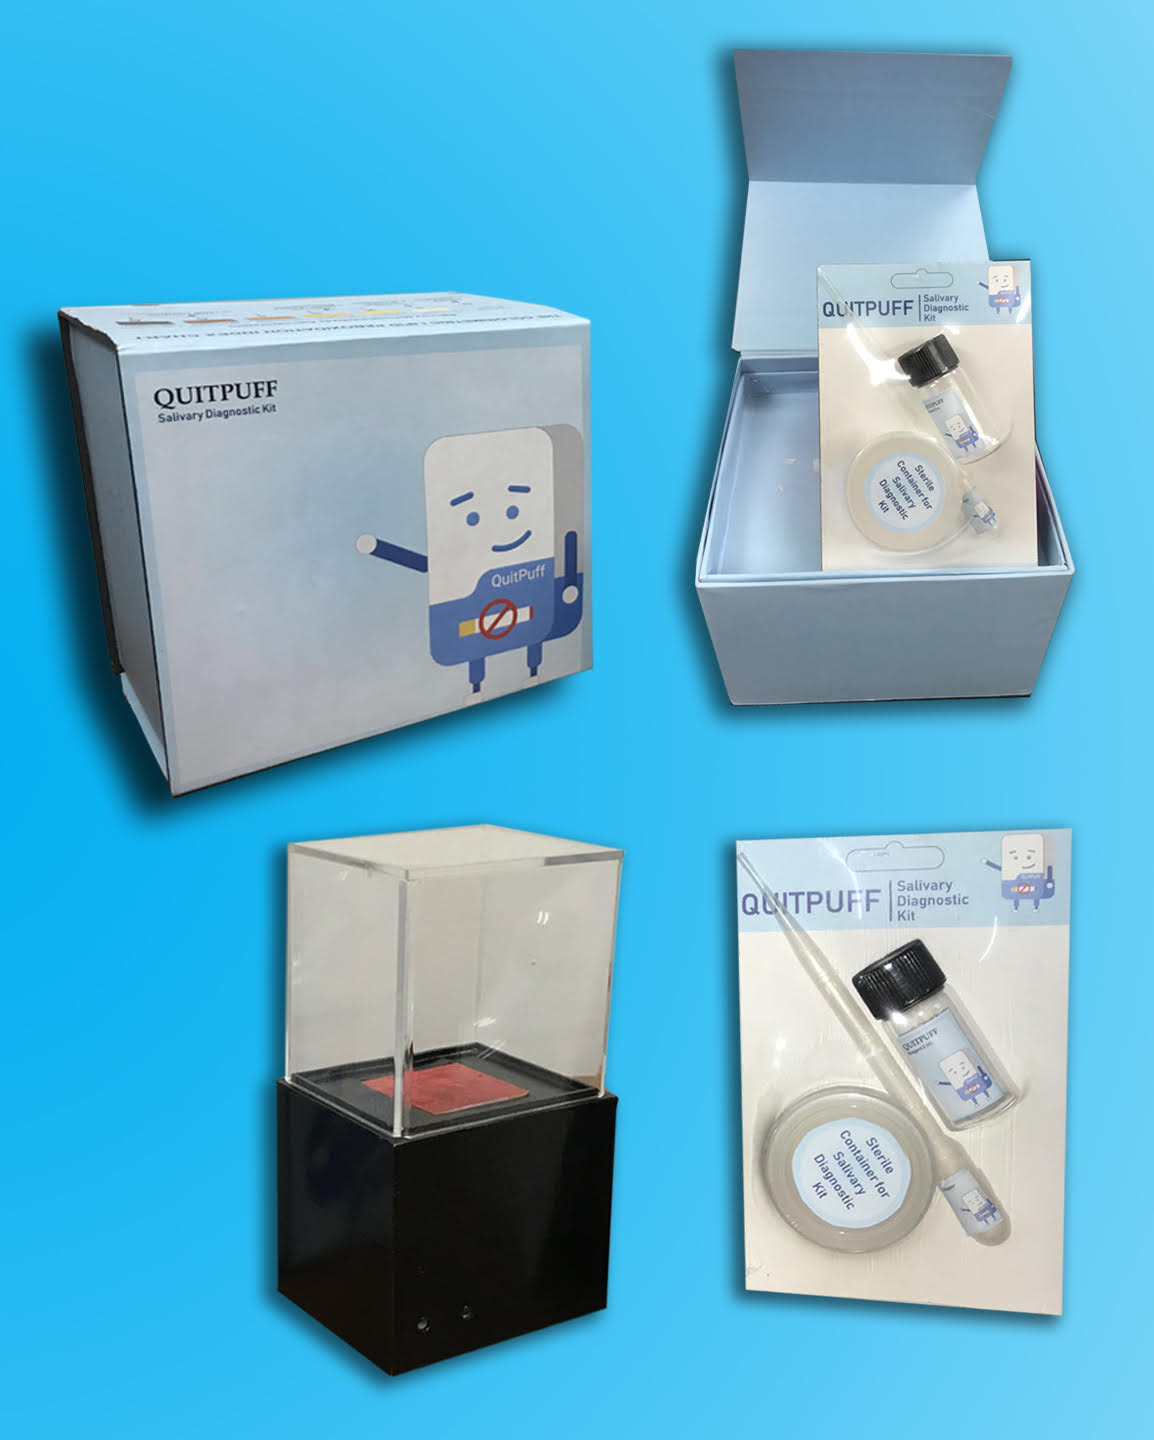 The prototype of QuitPuff kit to detect oral cancer